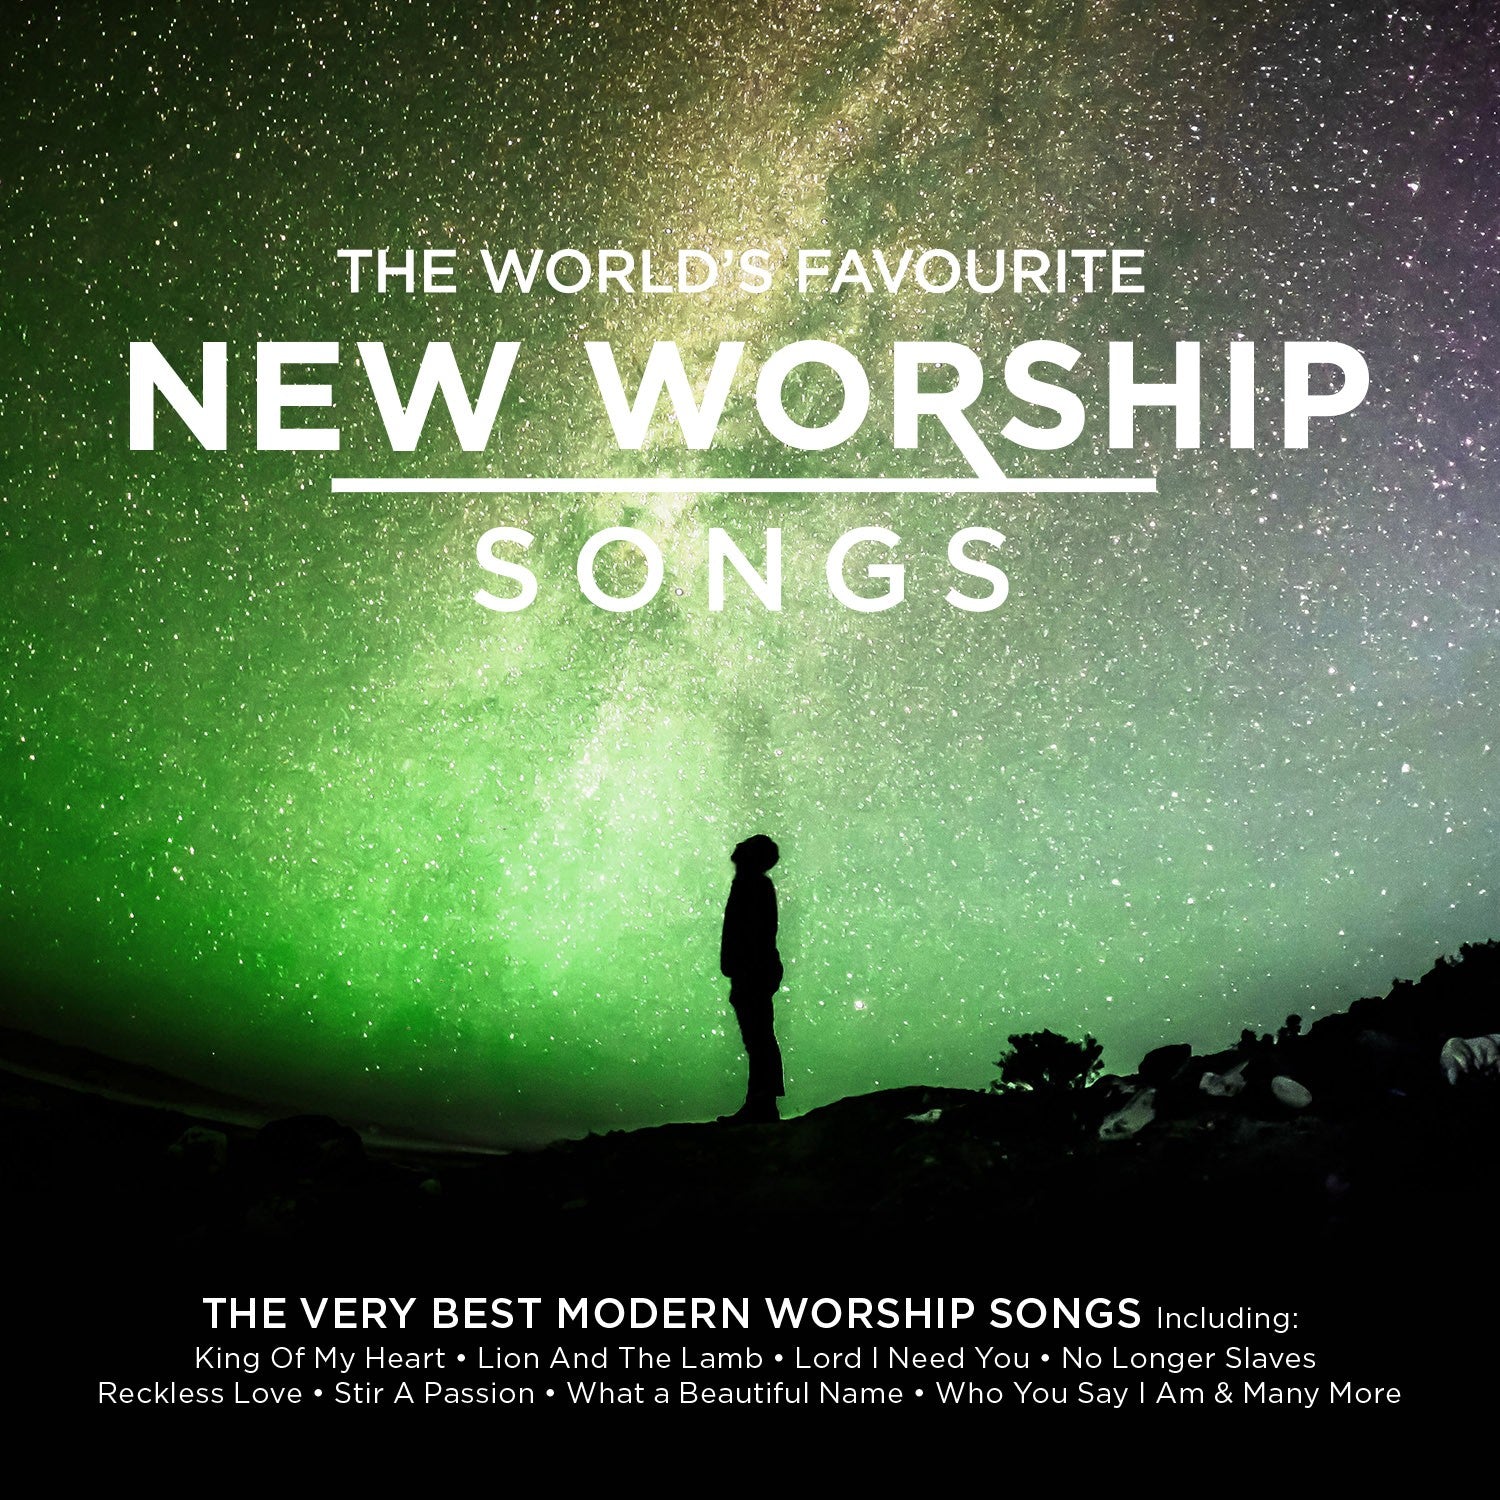 Image of The World's Favourite New Worship Songs other